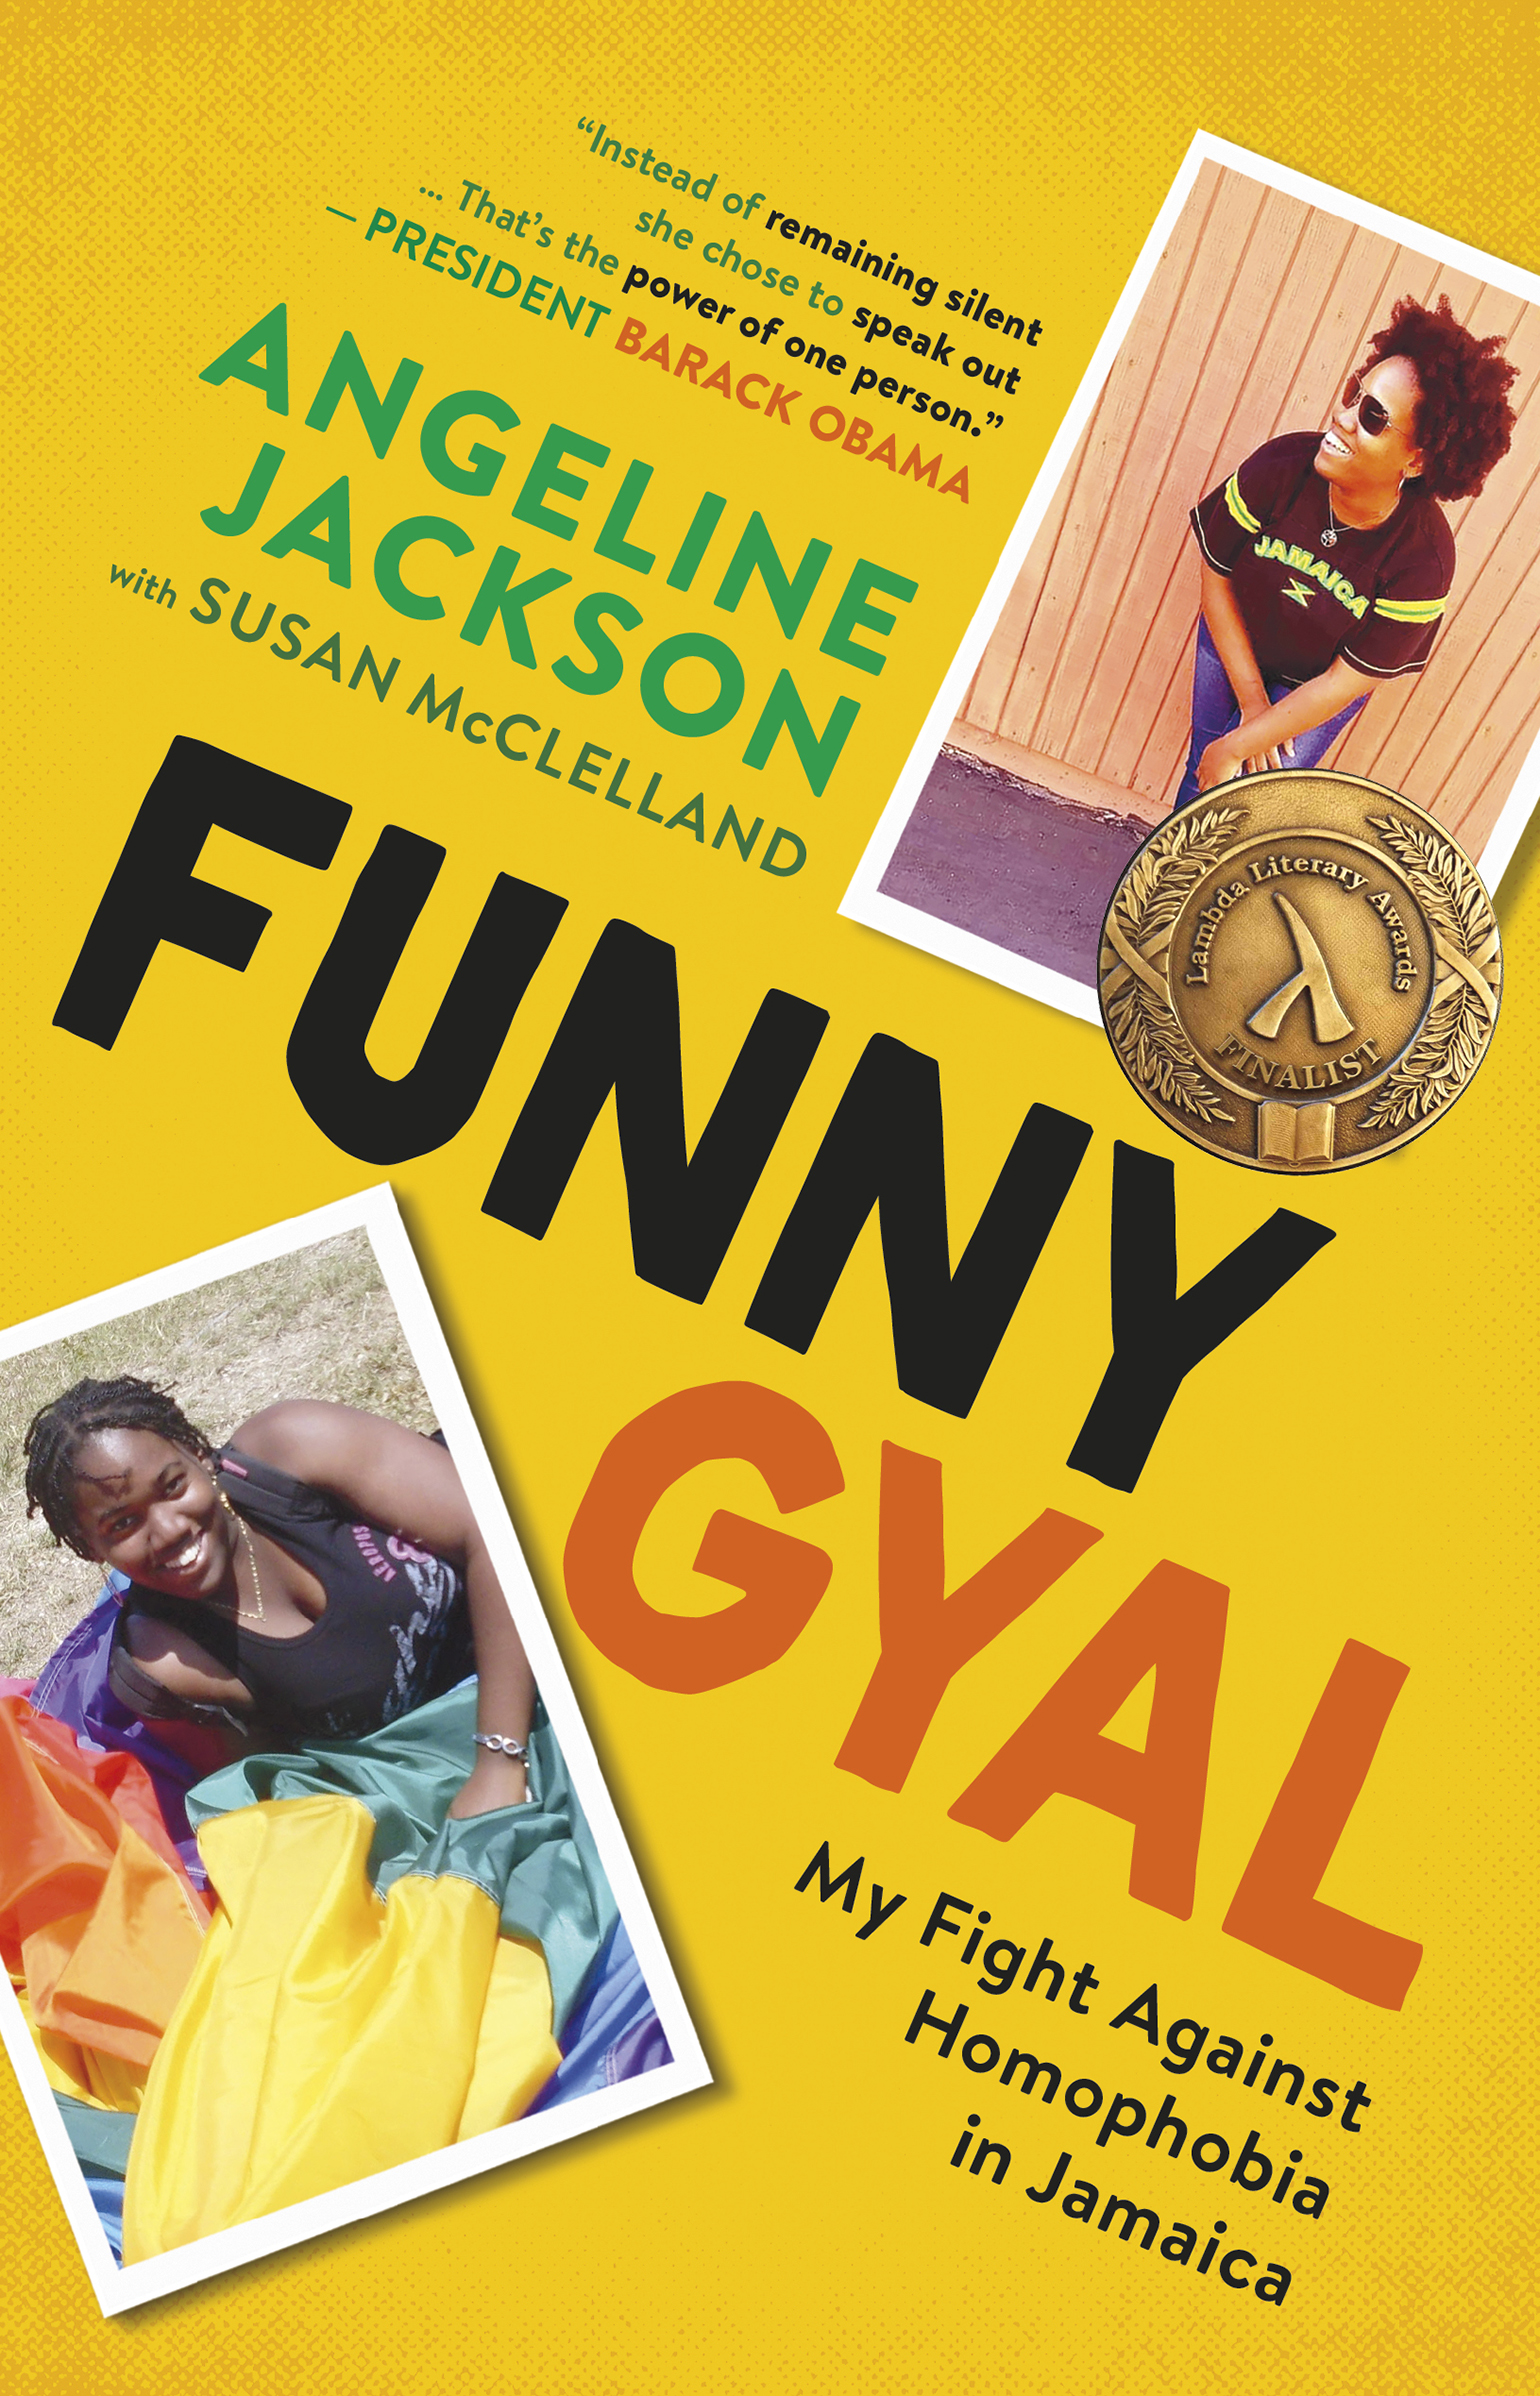 The cover of Funny Gyal by Angeline Jackson.